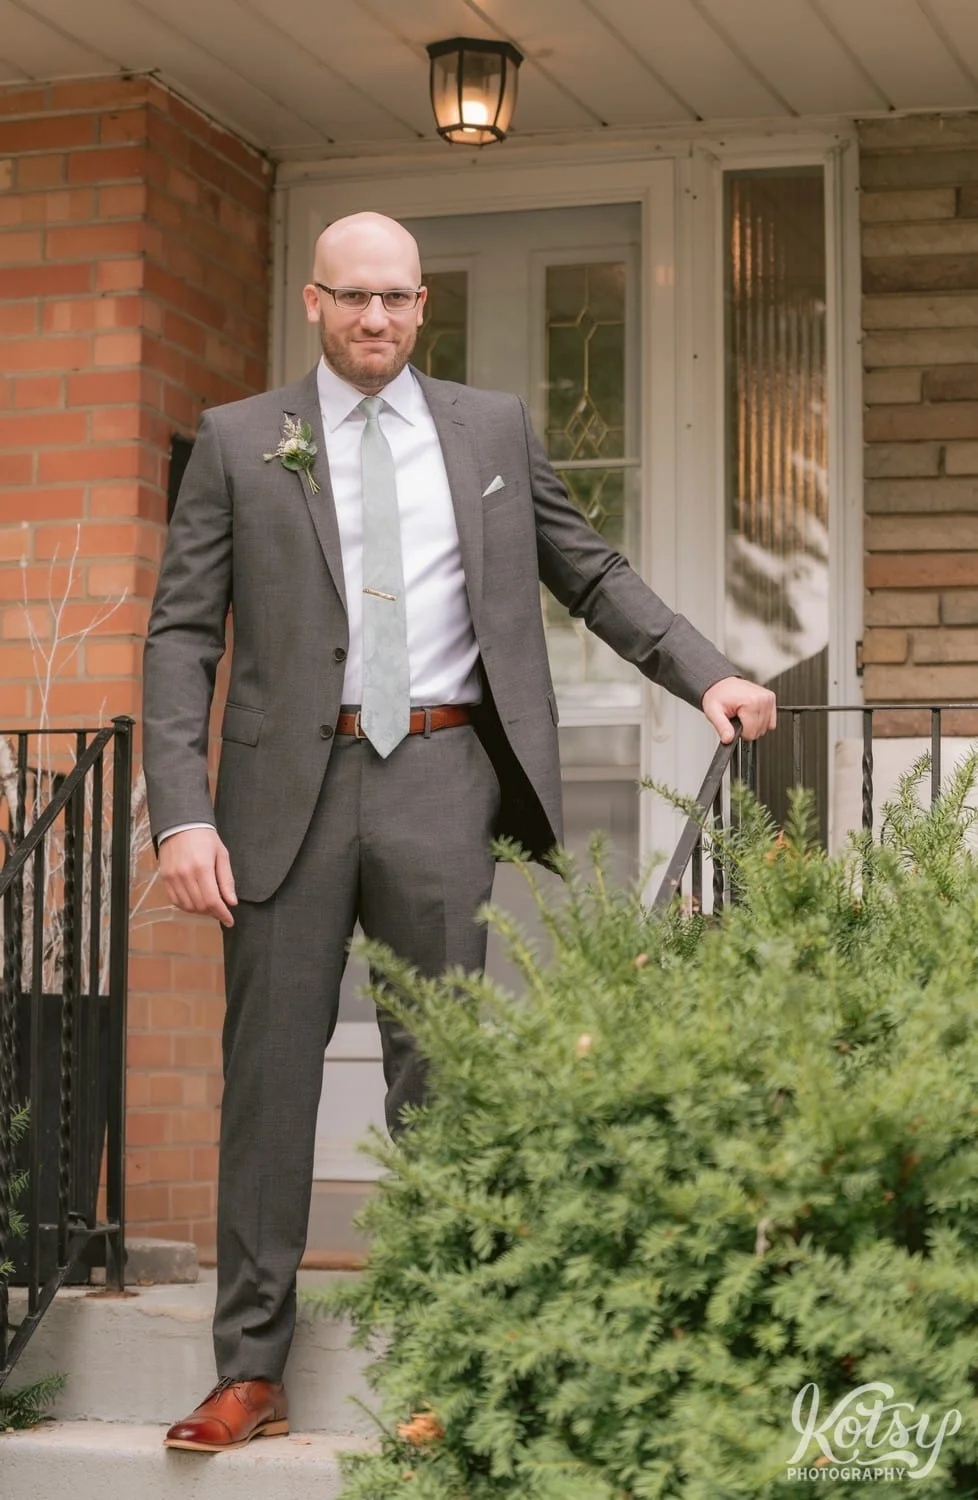 A groom wearing a gray suit and green tie stands on his front steps with his hand on the railing looking at the camera with a smile